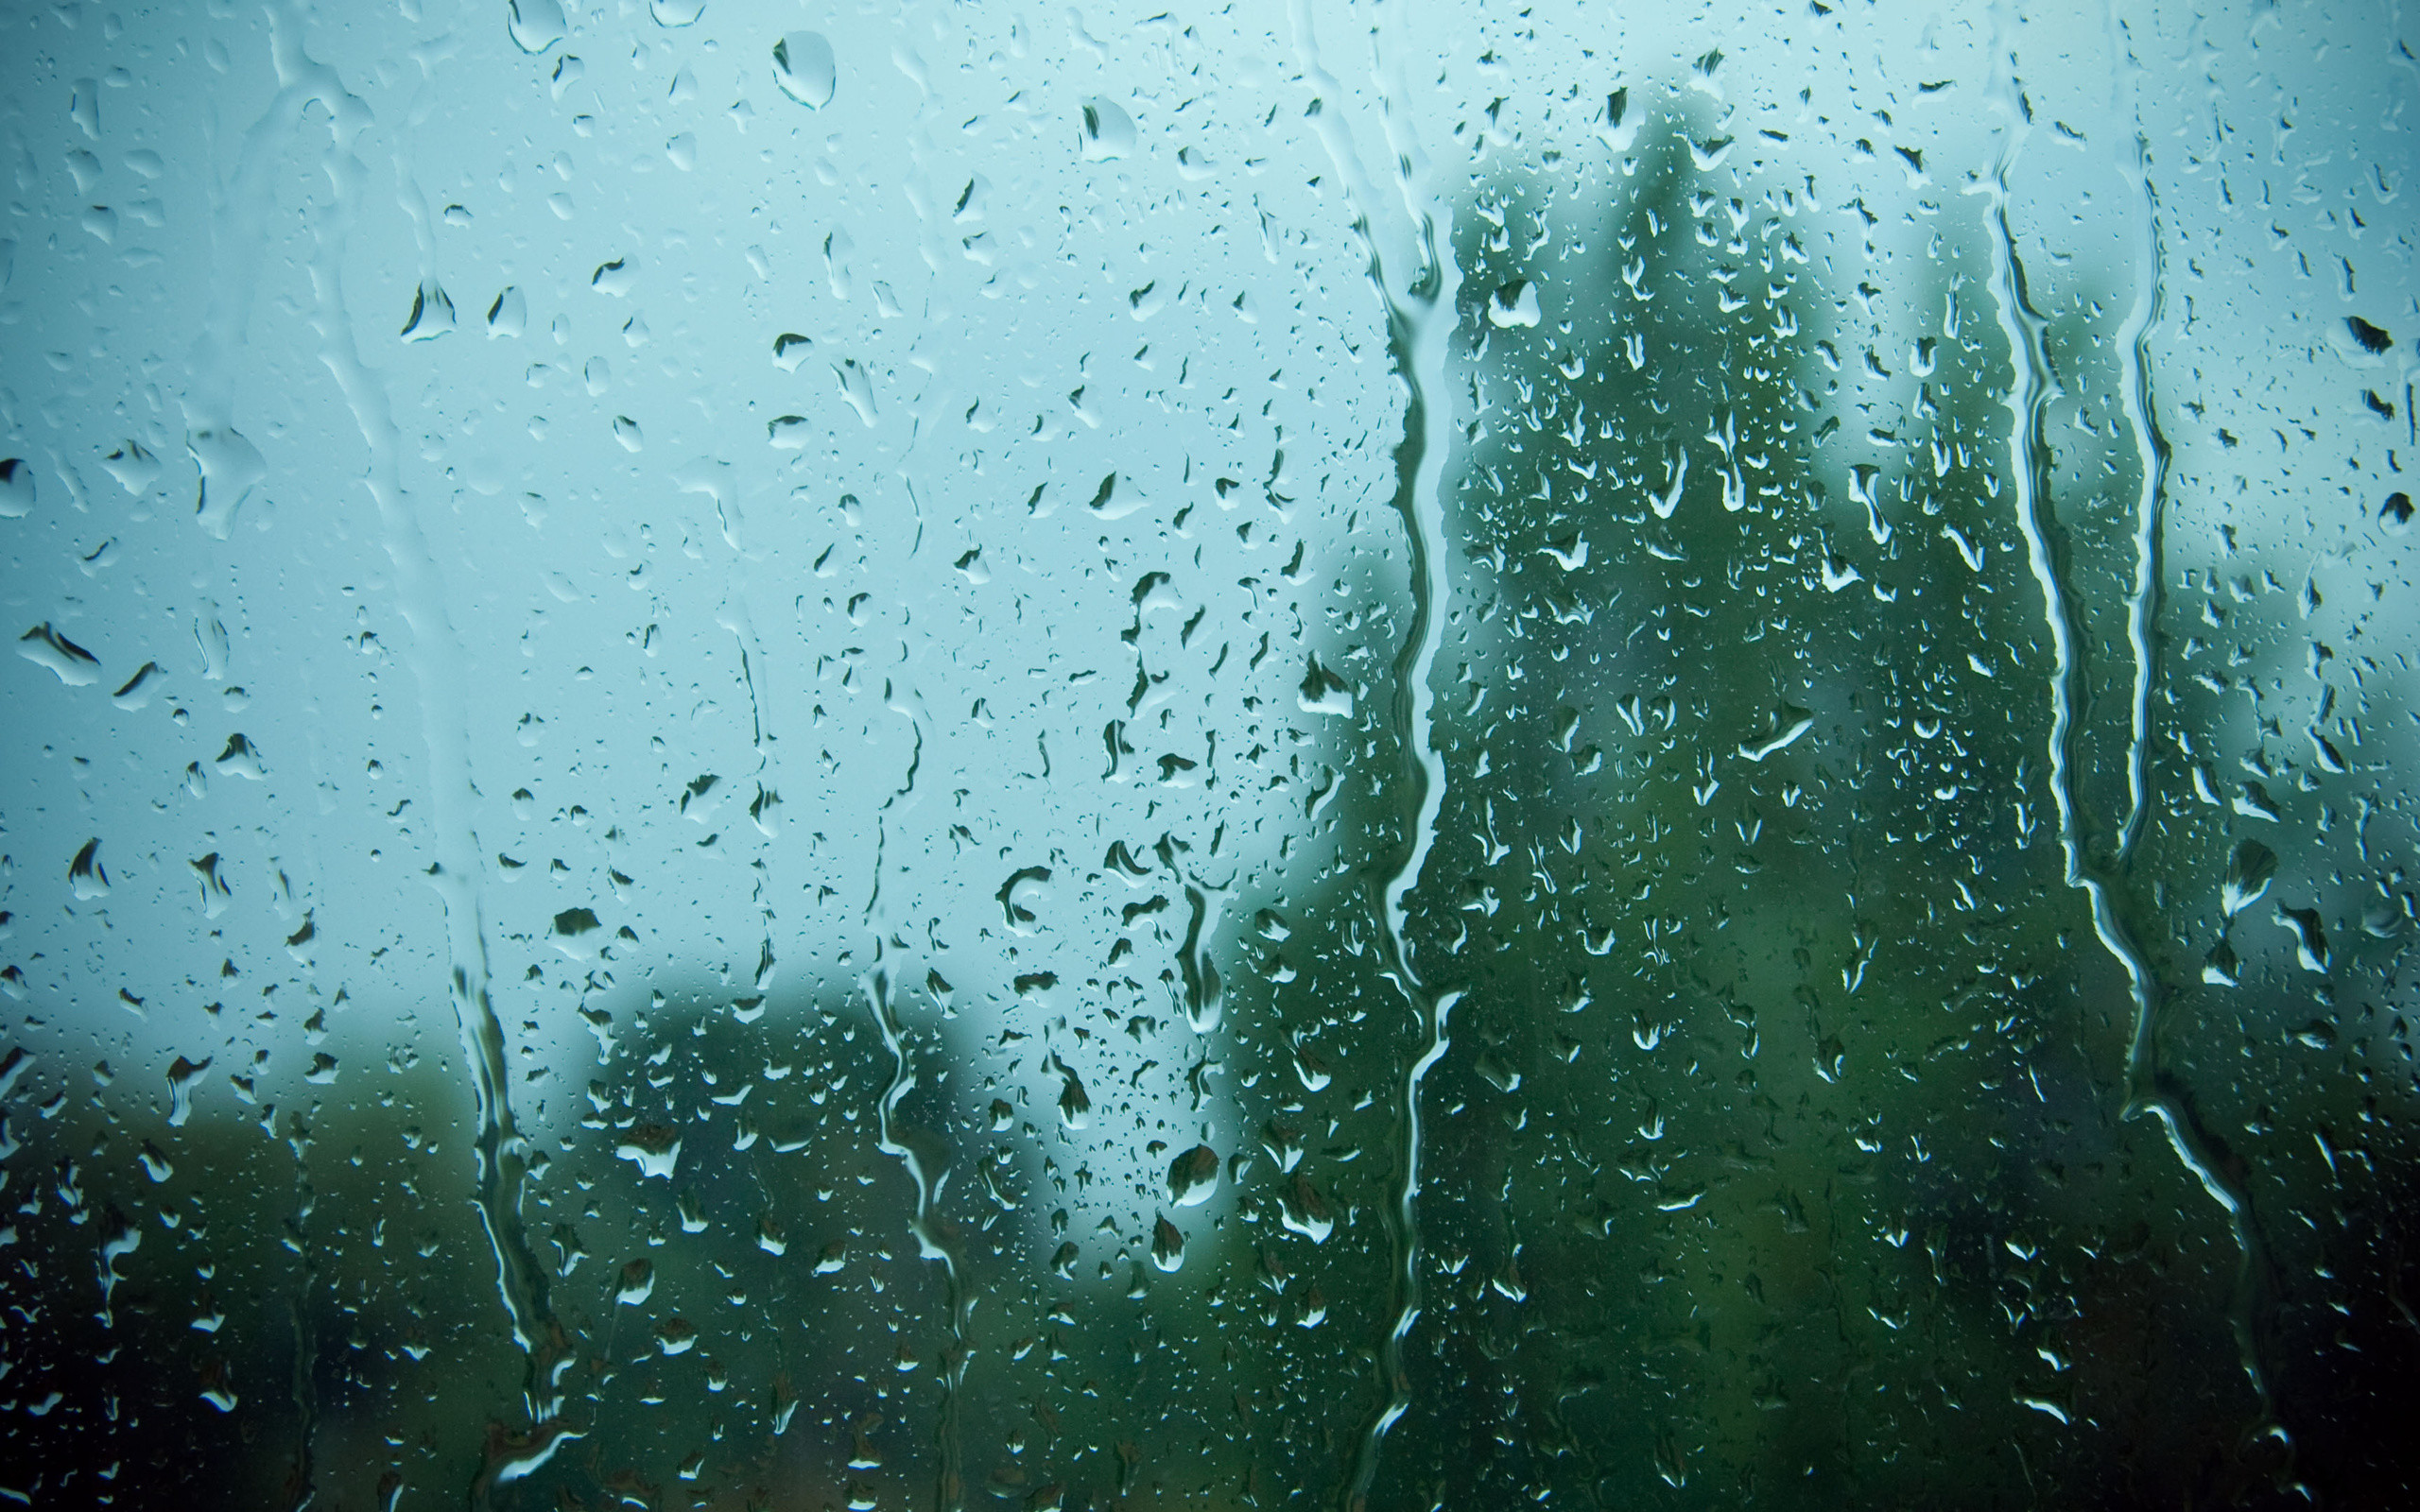 2560x1600 73 Raindrops HD Wallpapers | Backgrounds - Wallpaper Abyss